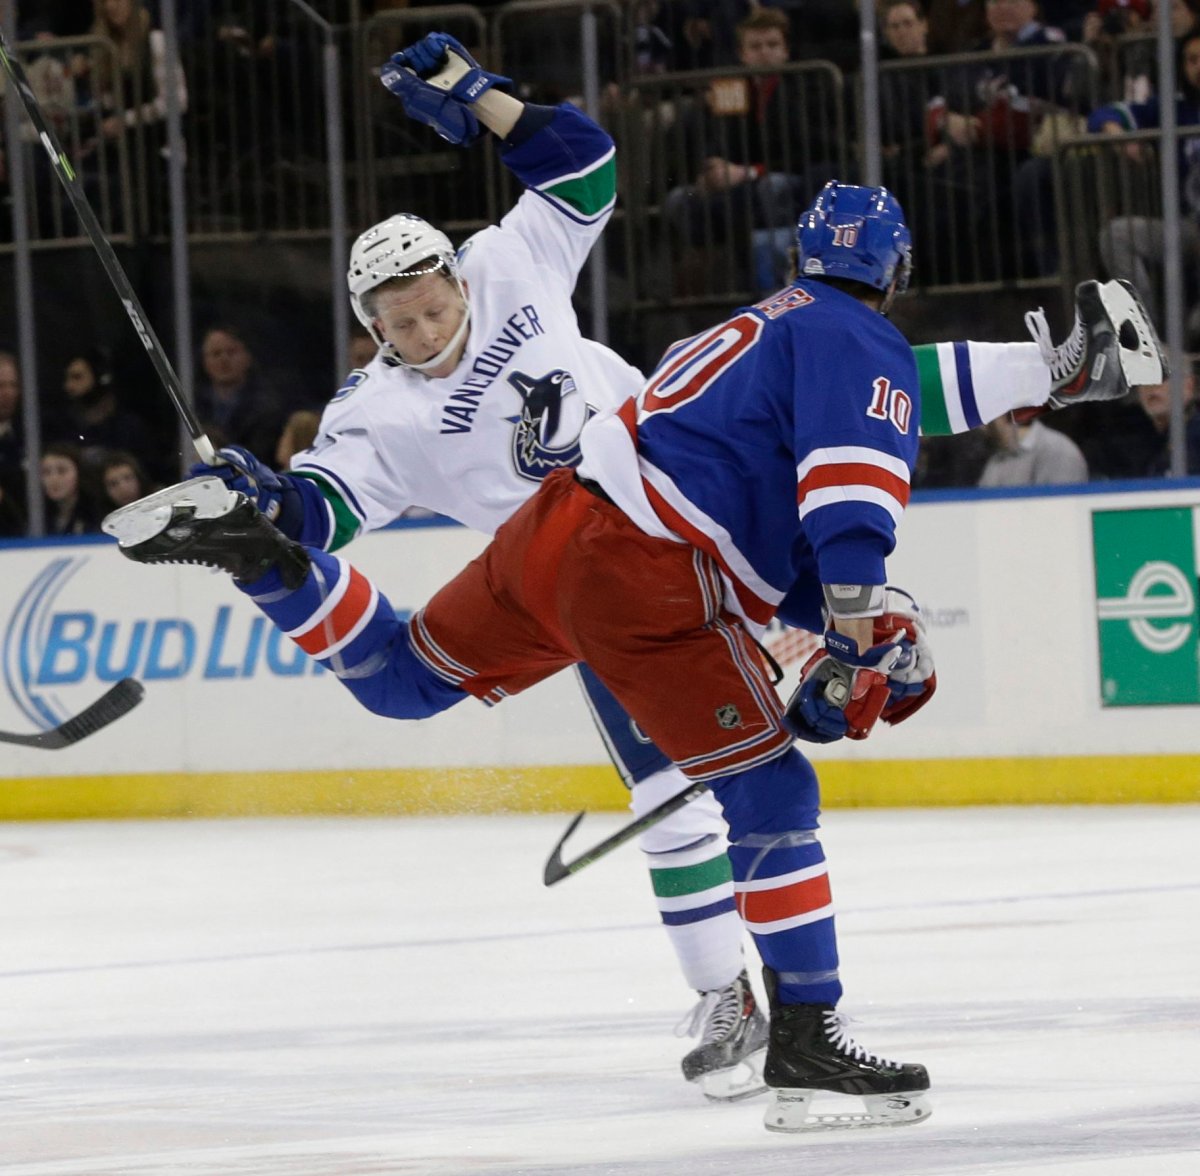 New York Rangers center J.T. Miller checks Vancouver Canucks left wing Ronalds Kenins during the first period.  